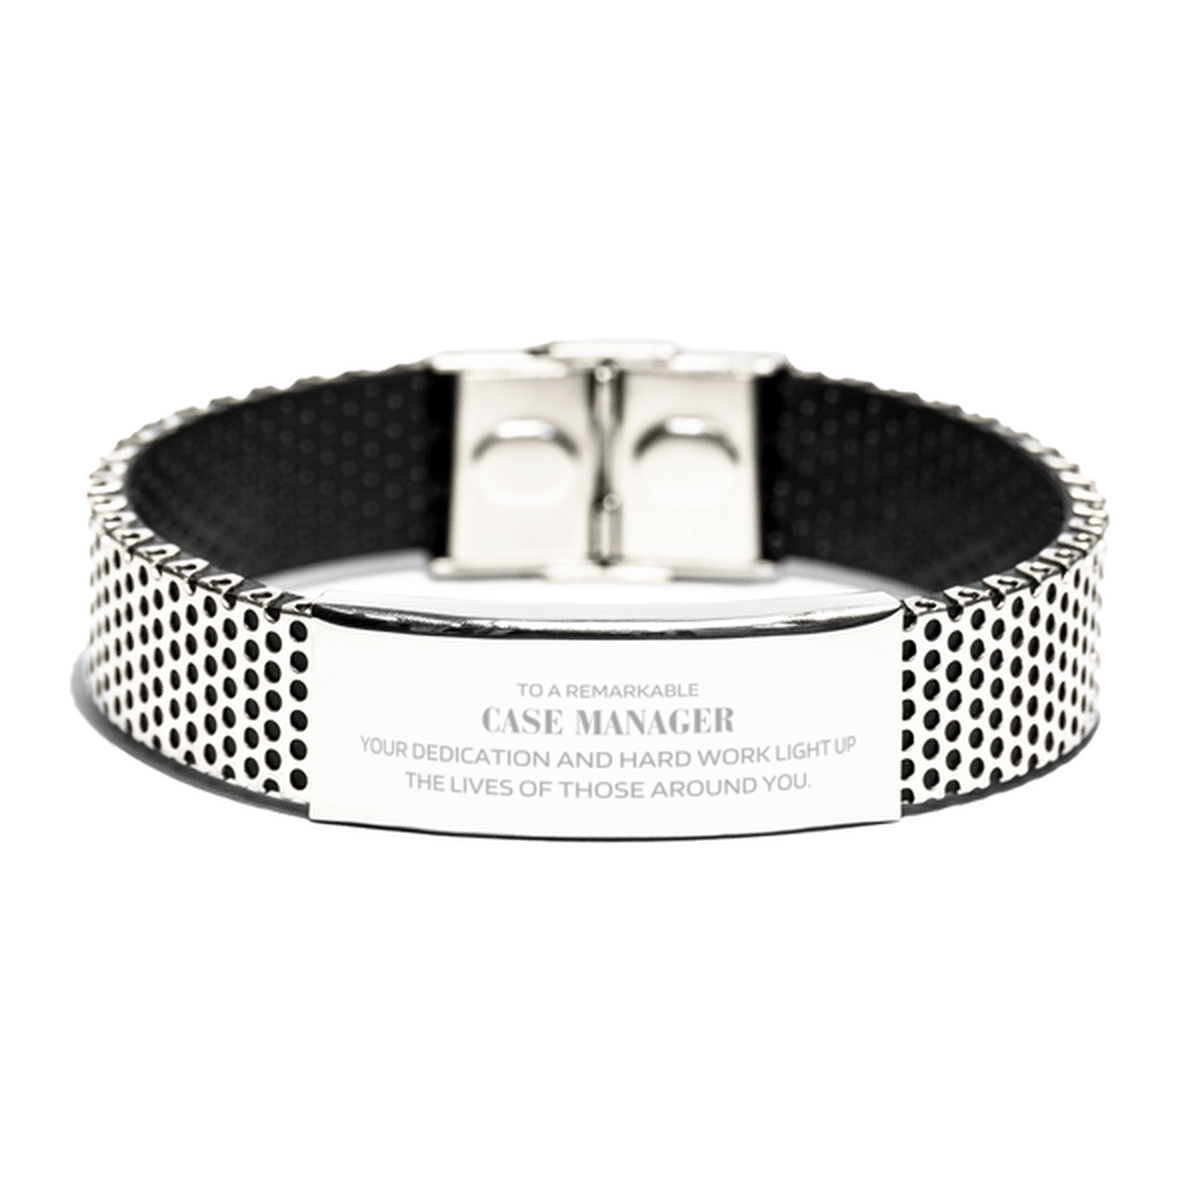 Remarkable Case Manager Gifts, Your dedication and hard work, Inspirational Birthday Christmas Unique Stainless Steel Bracelet For Case Manager, Coworkers, Men, Women, Friends - Mallard Moon Gift Shop